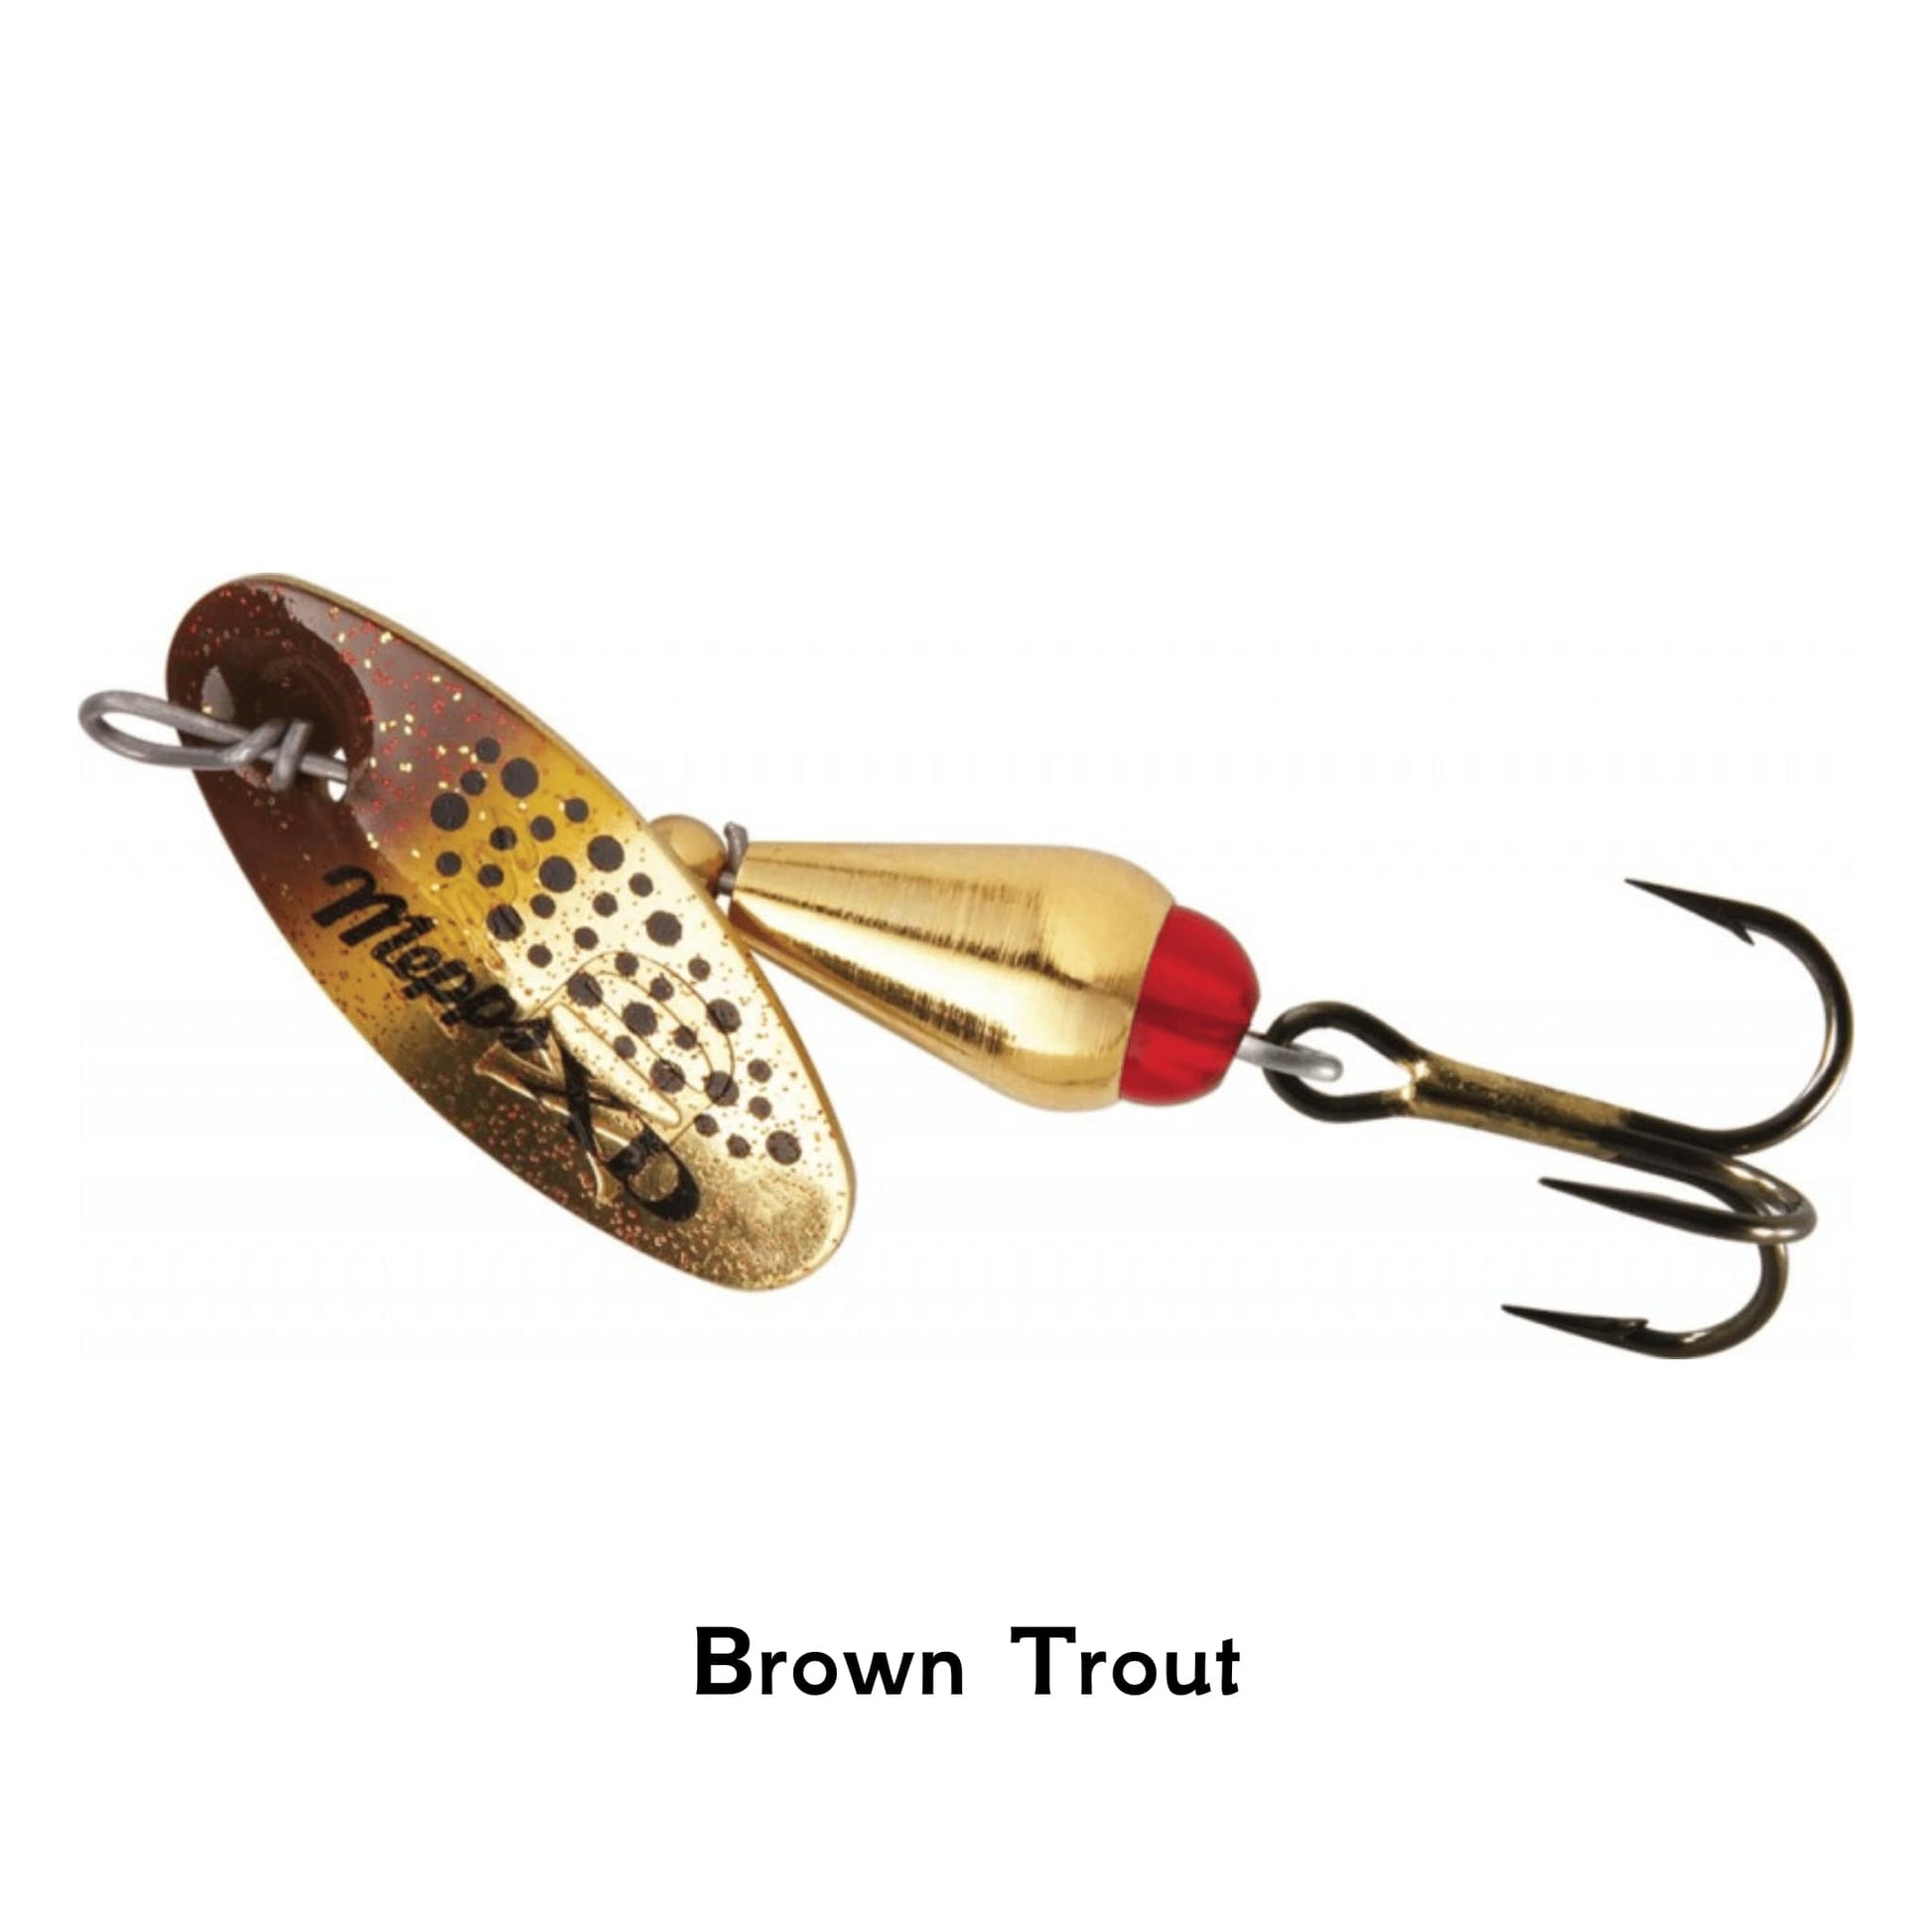 Mepps XD Xtra Deep Brown Trout Spoon Fishing Lure All Colours Size 2 3 Pike Perch Zander Spinner Vertical Jig